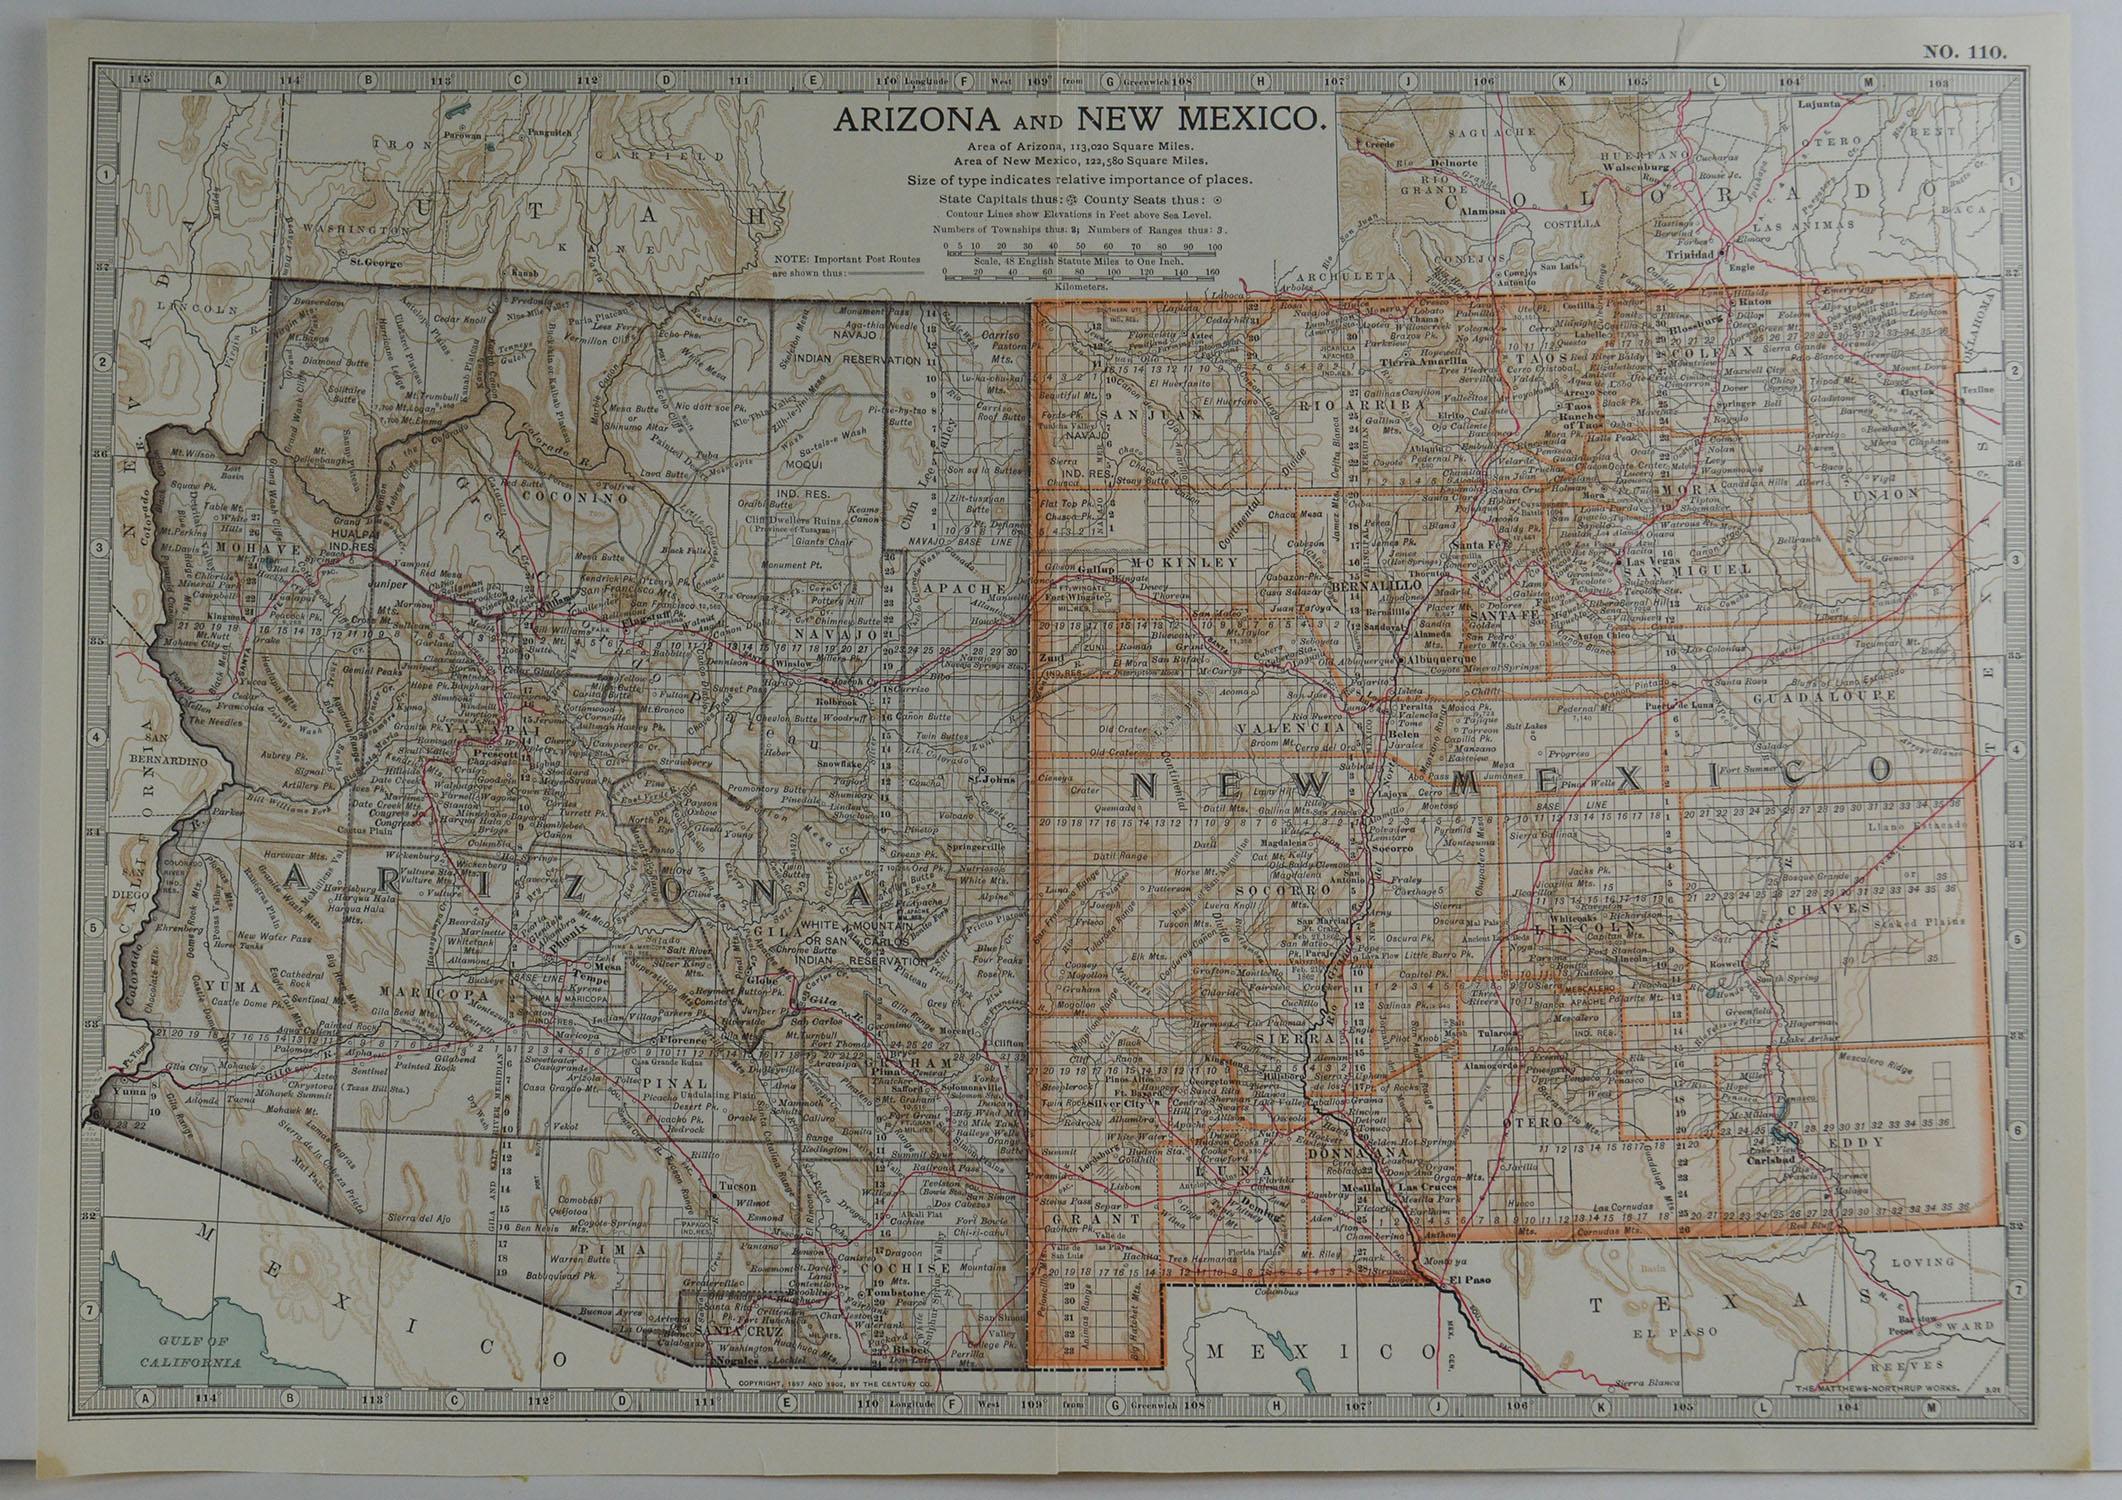 Great map of Arizona & New Mexico

Original color.

Published, circa 1890

Unframed.

One minor edge tear.
 